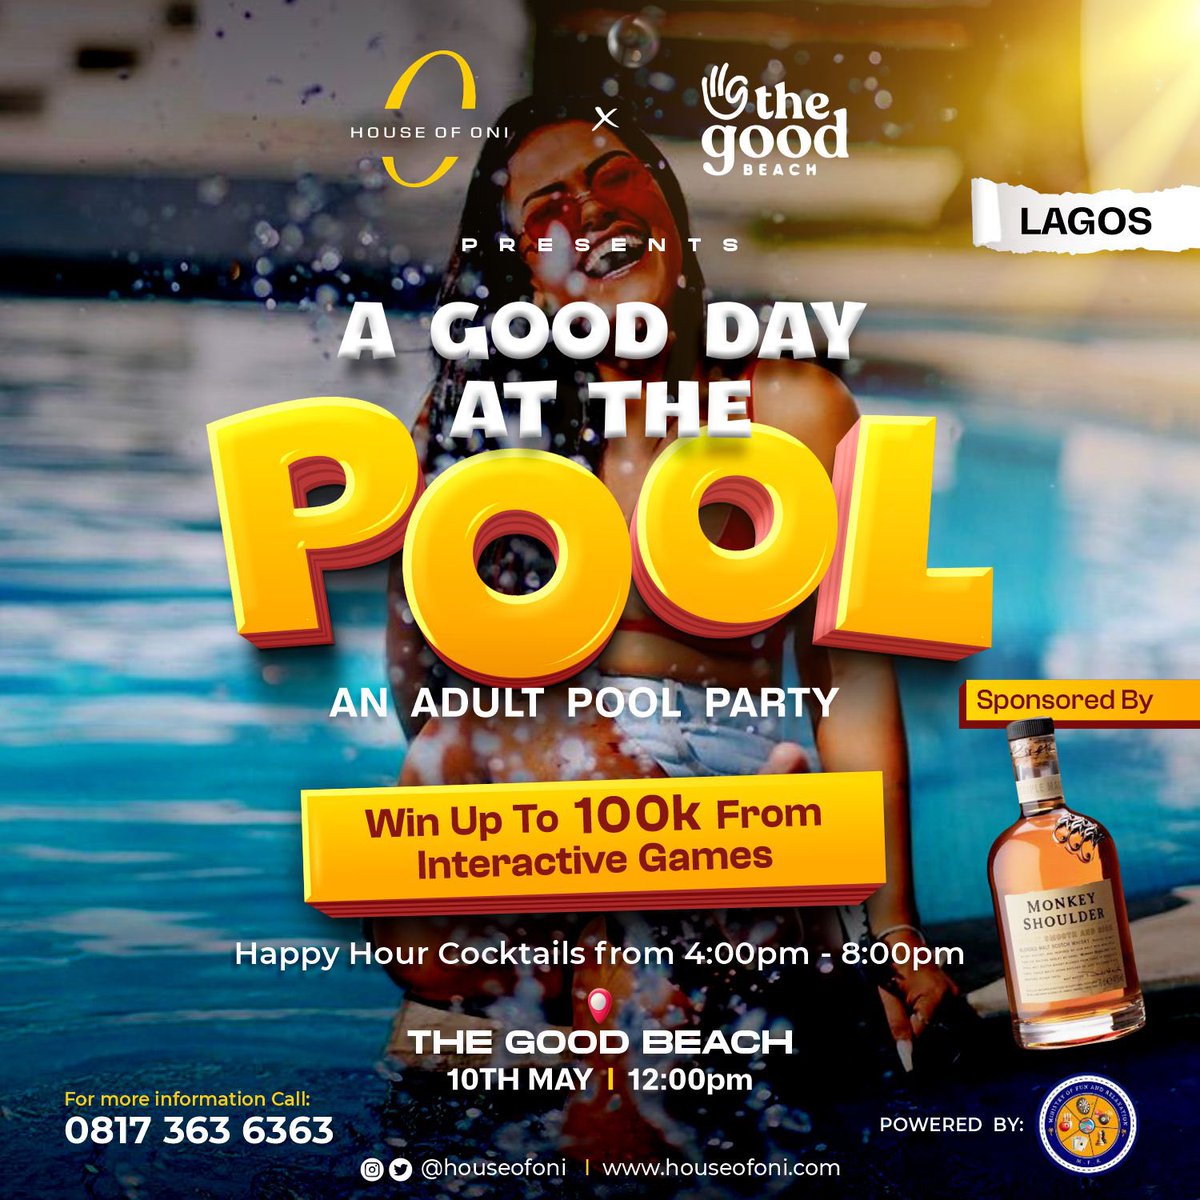 Upto N100,000 up for grabs at the hottest adult pool party!

To get your tickets call or send us a whatsapp message via 08173636363

#houseofoni #houseofoniparty #thegoodbeach #beachvibes #lagosparty #hoo #newadventures #silentdisco #silentdiscoafrica